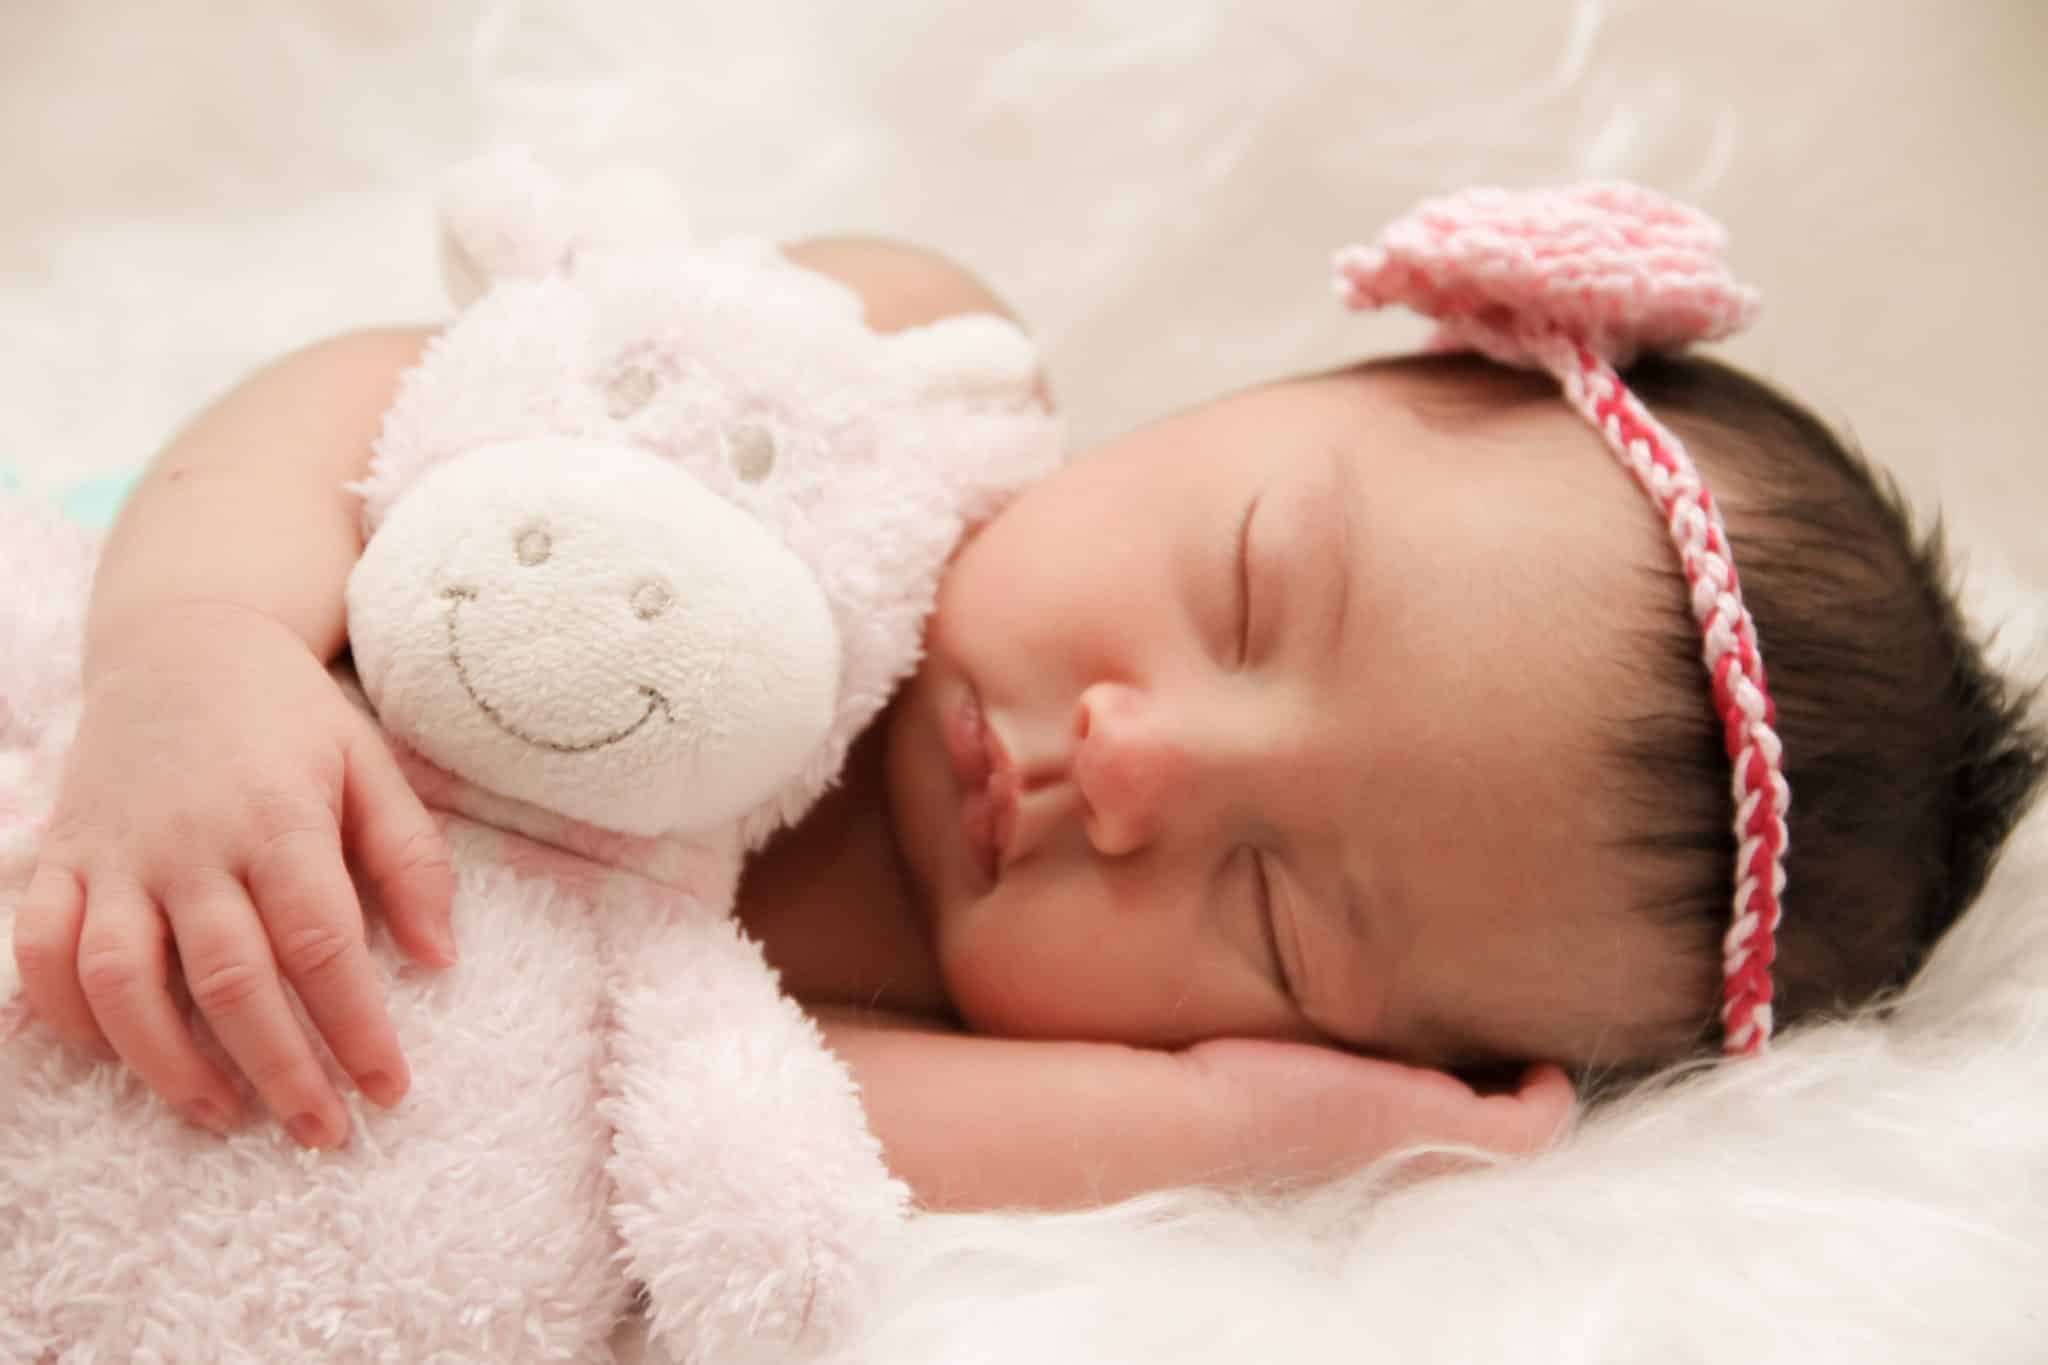 A baby peacefully sleeping with a stuffed animal.